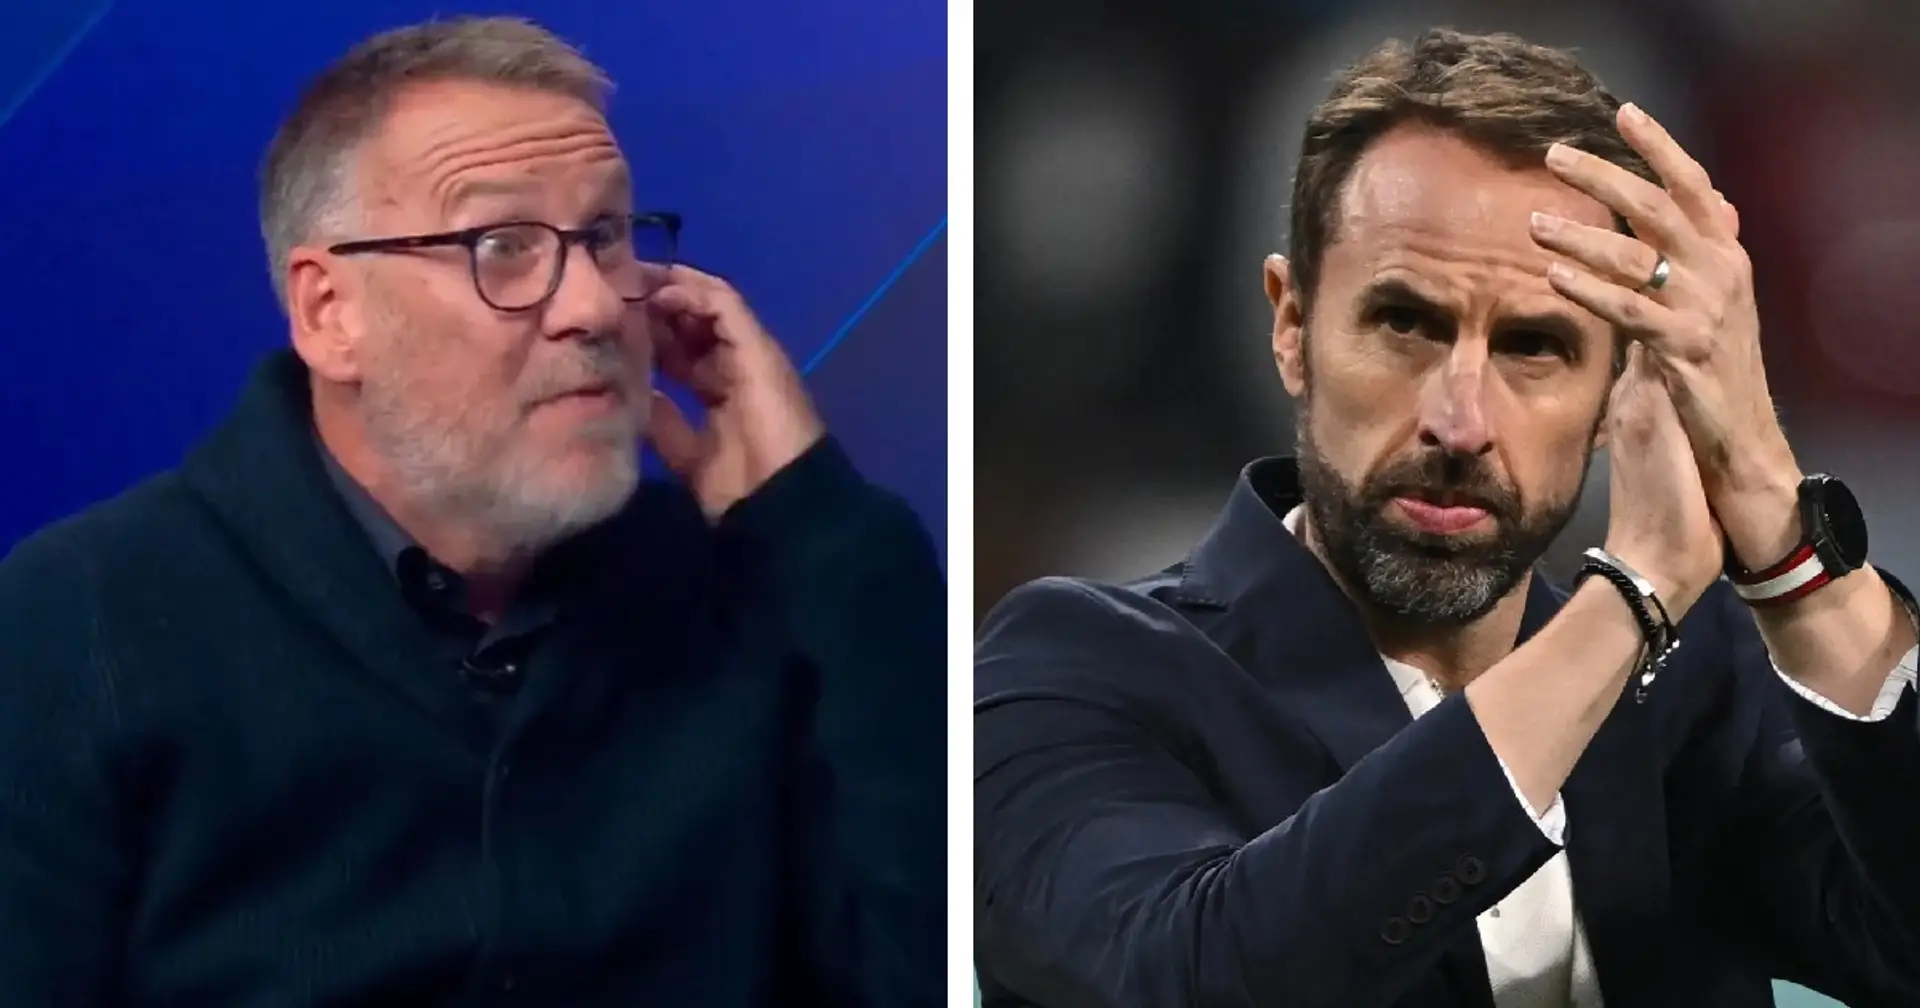 'Beats me': Merson slams Southgate for leaving Chelsea star out of England squad